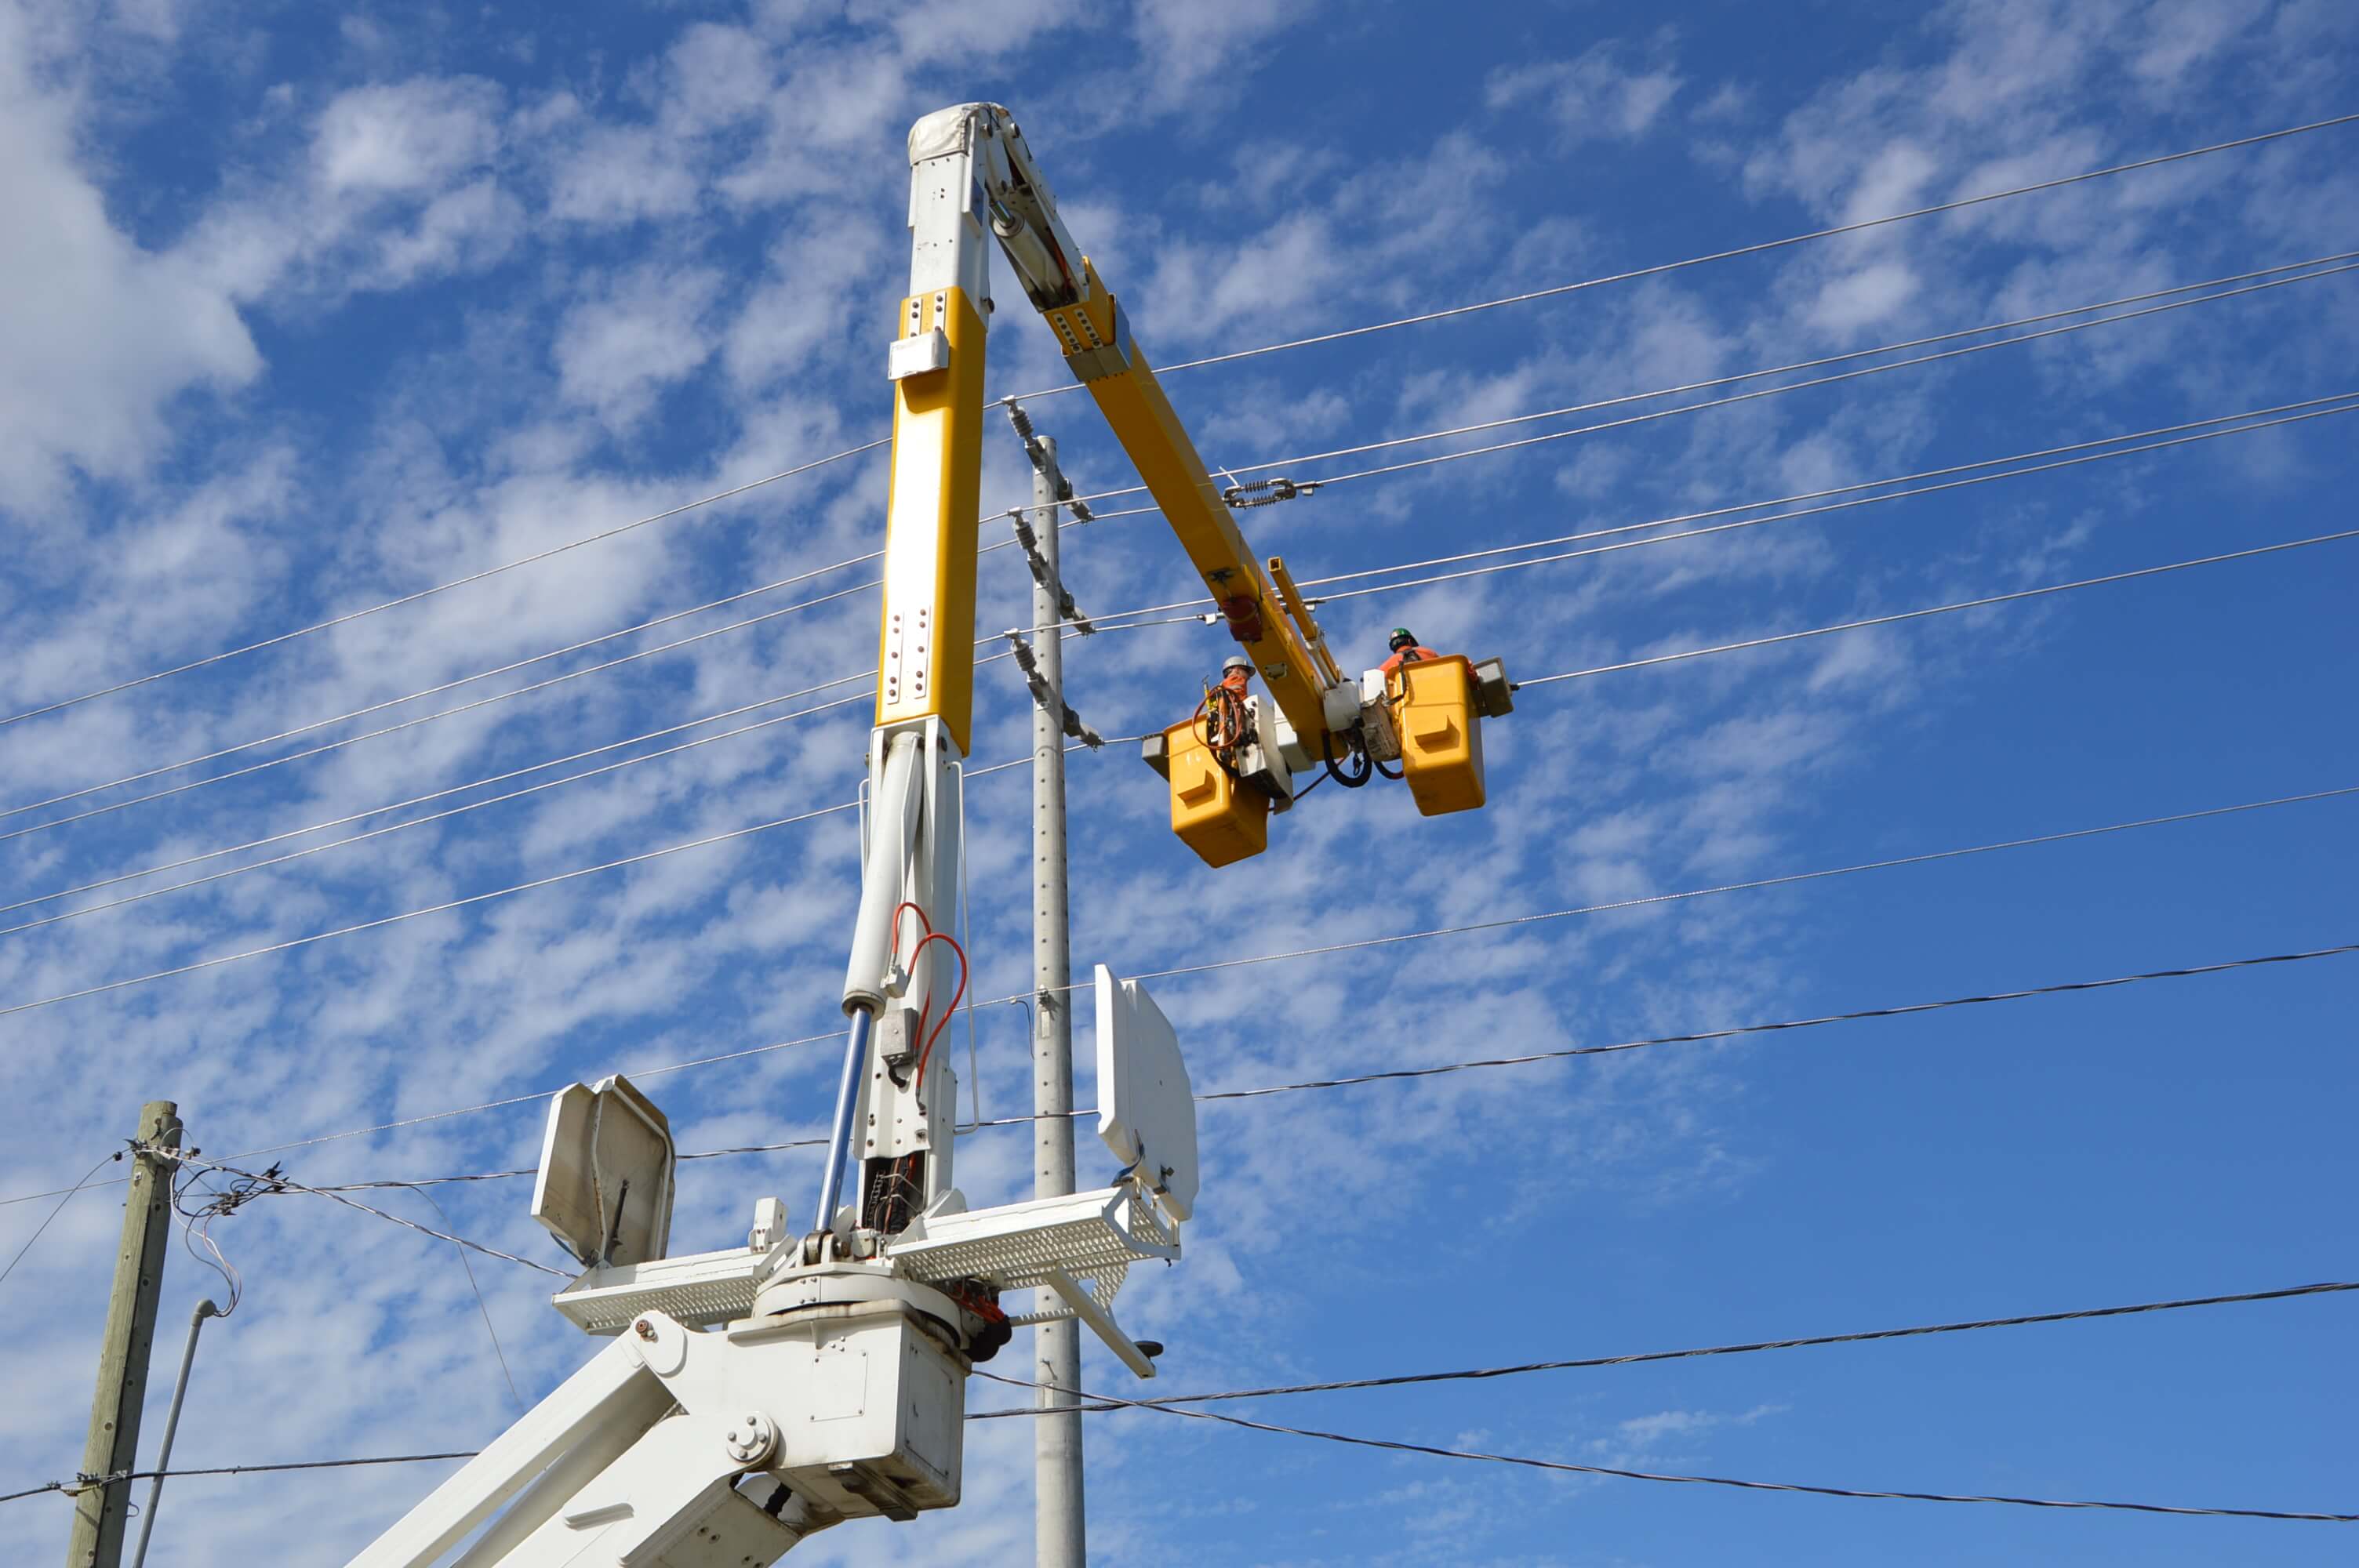 Electric line workers on a bucket truck